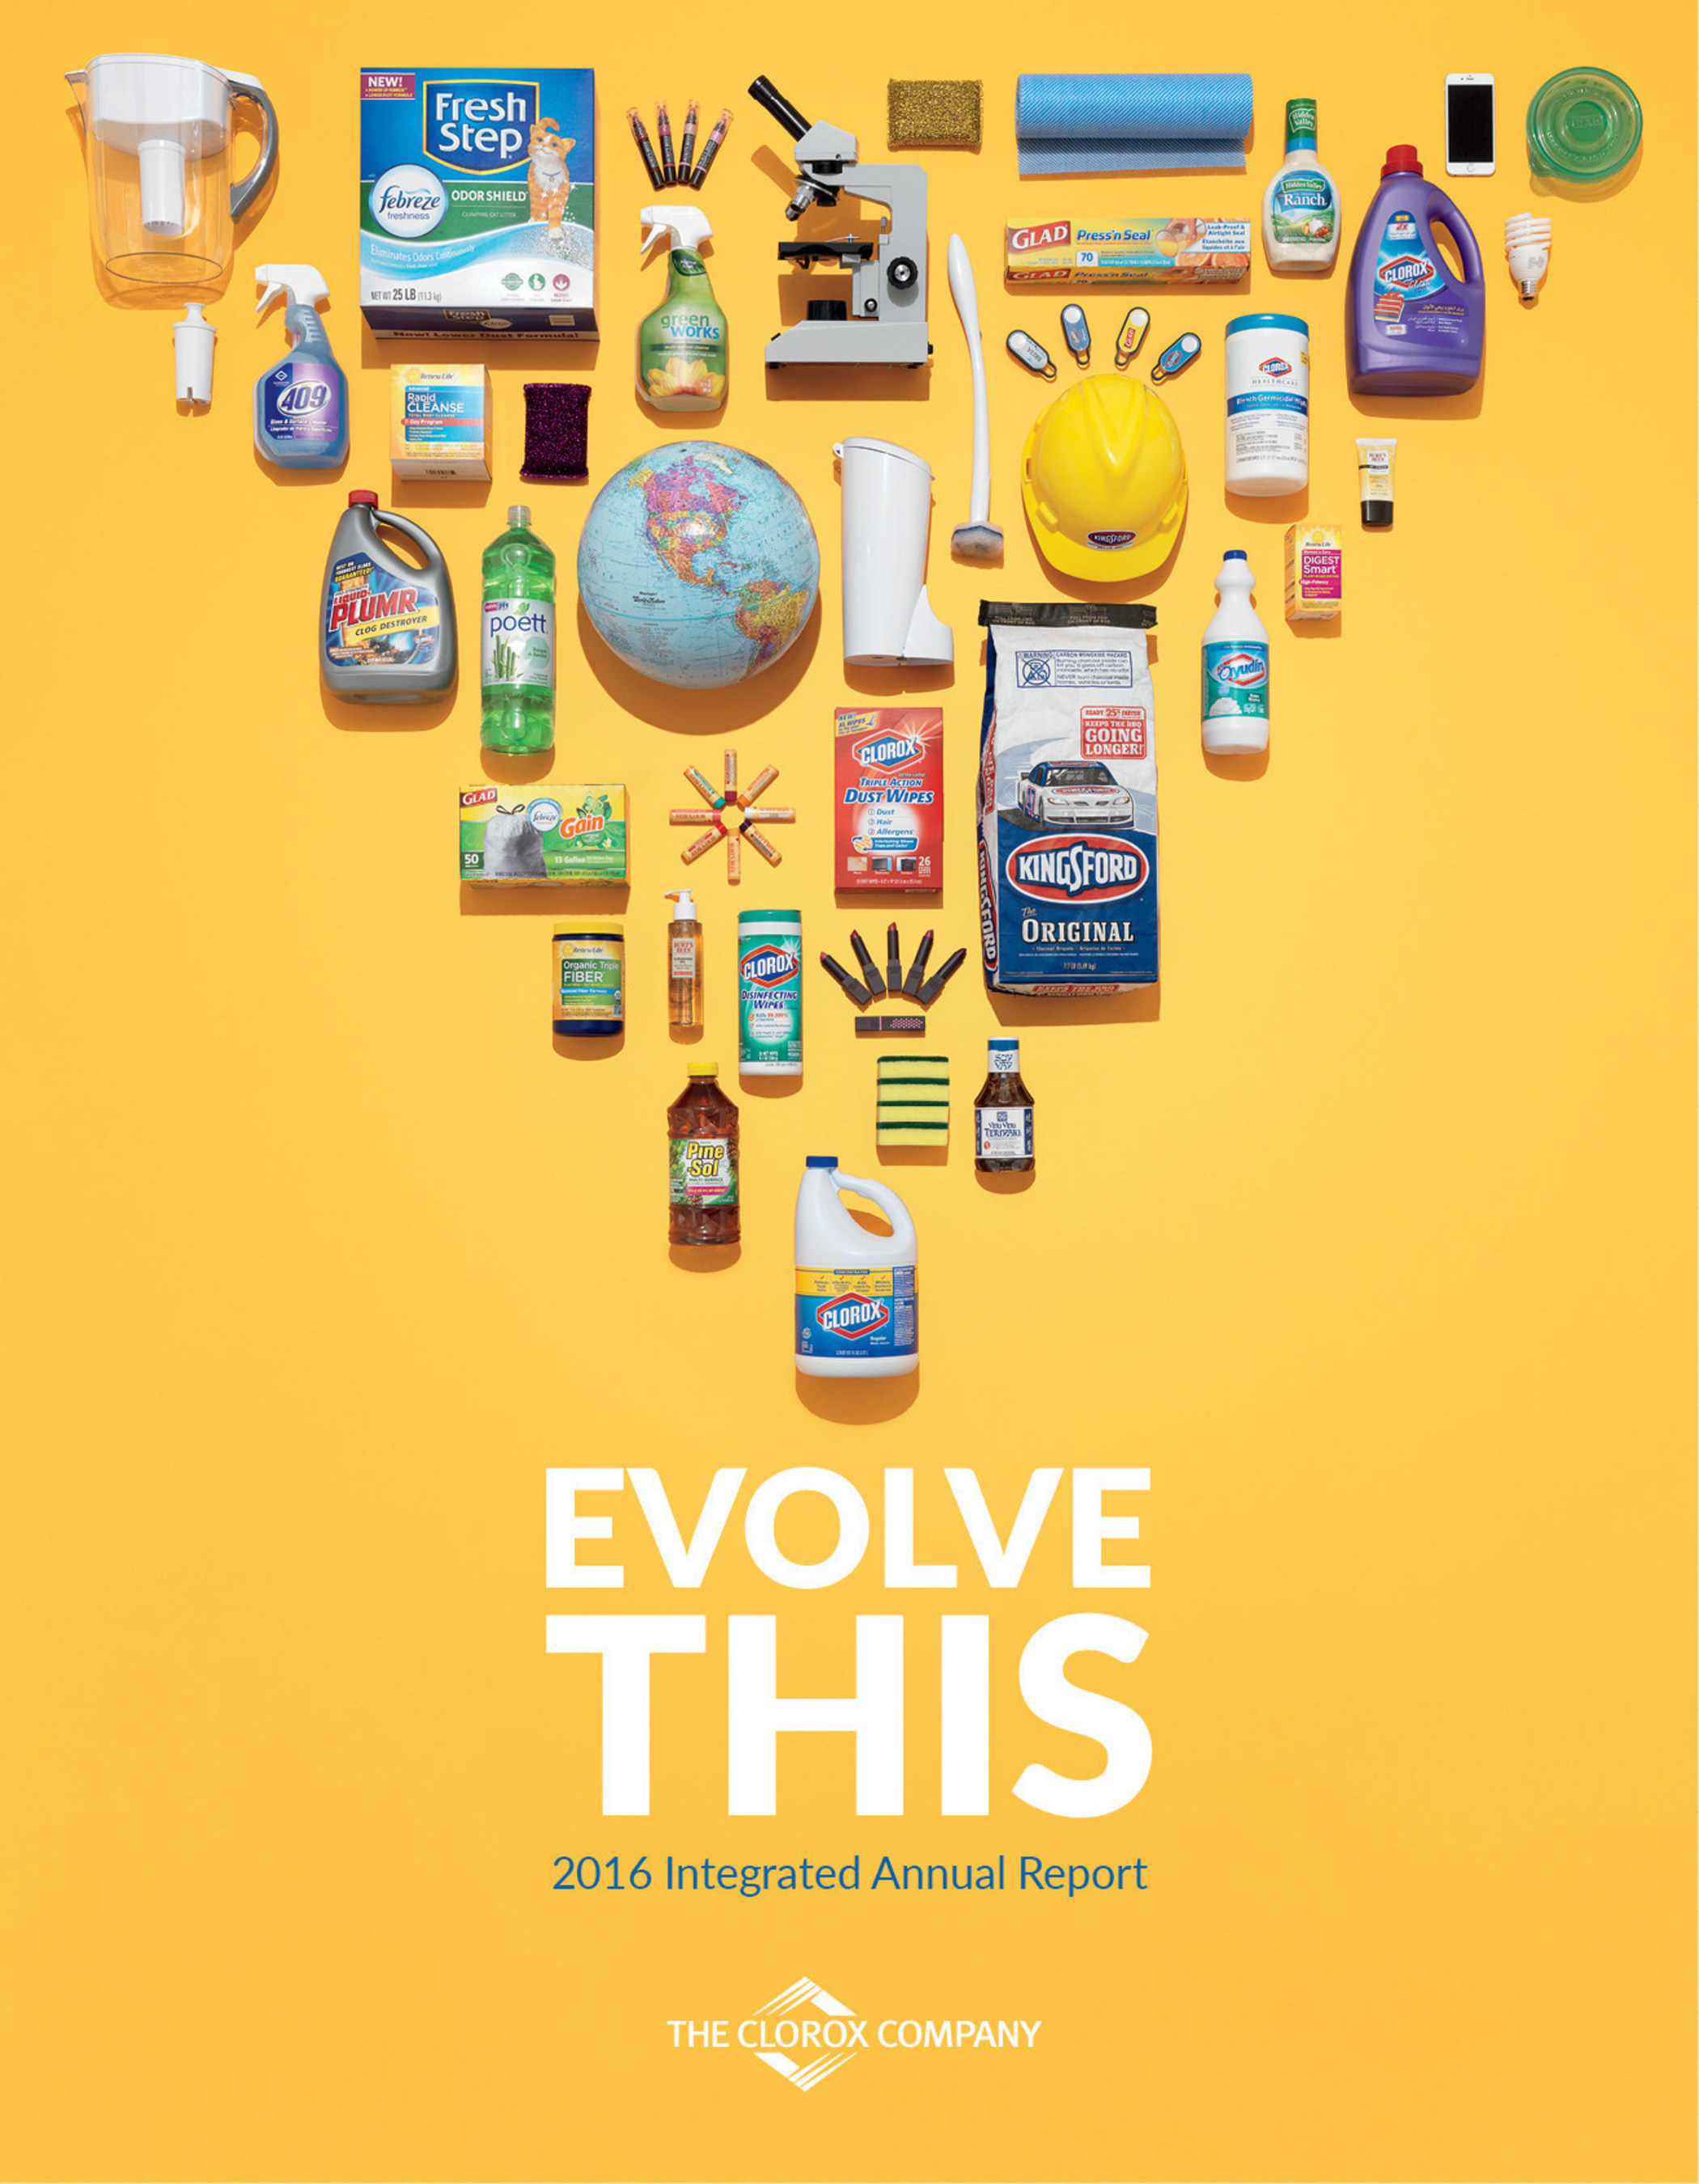 Clorox 2016 integrated annual report highlights progress against 2020 Strategy, more than a century of evolution in health and wellness.